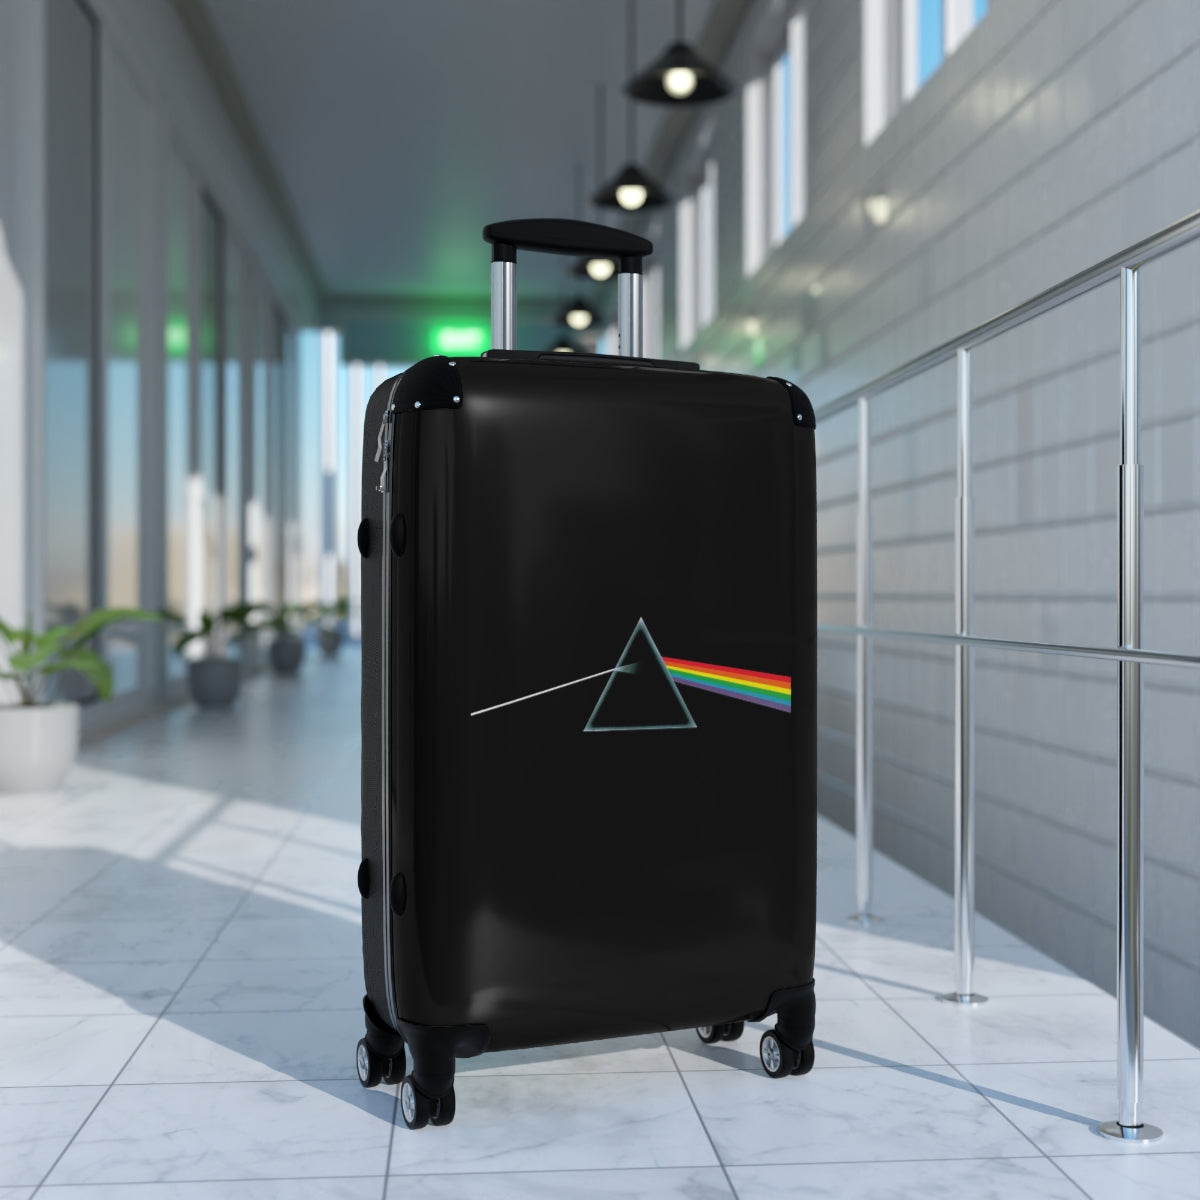 Getrott Pink Floyd Album Cover Black Cabin Suitcase Inner Pockets Extended Storage Adjustable Telescopic Handle Inner Pockets Double wheeled Polycarbonate Hard-shell Built-in Lock